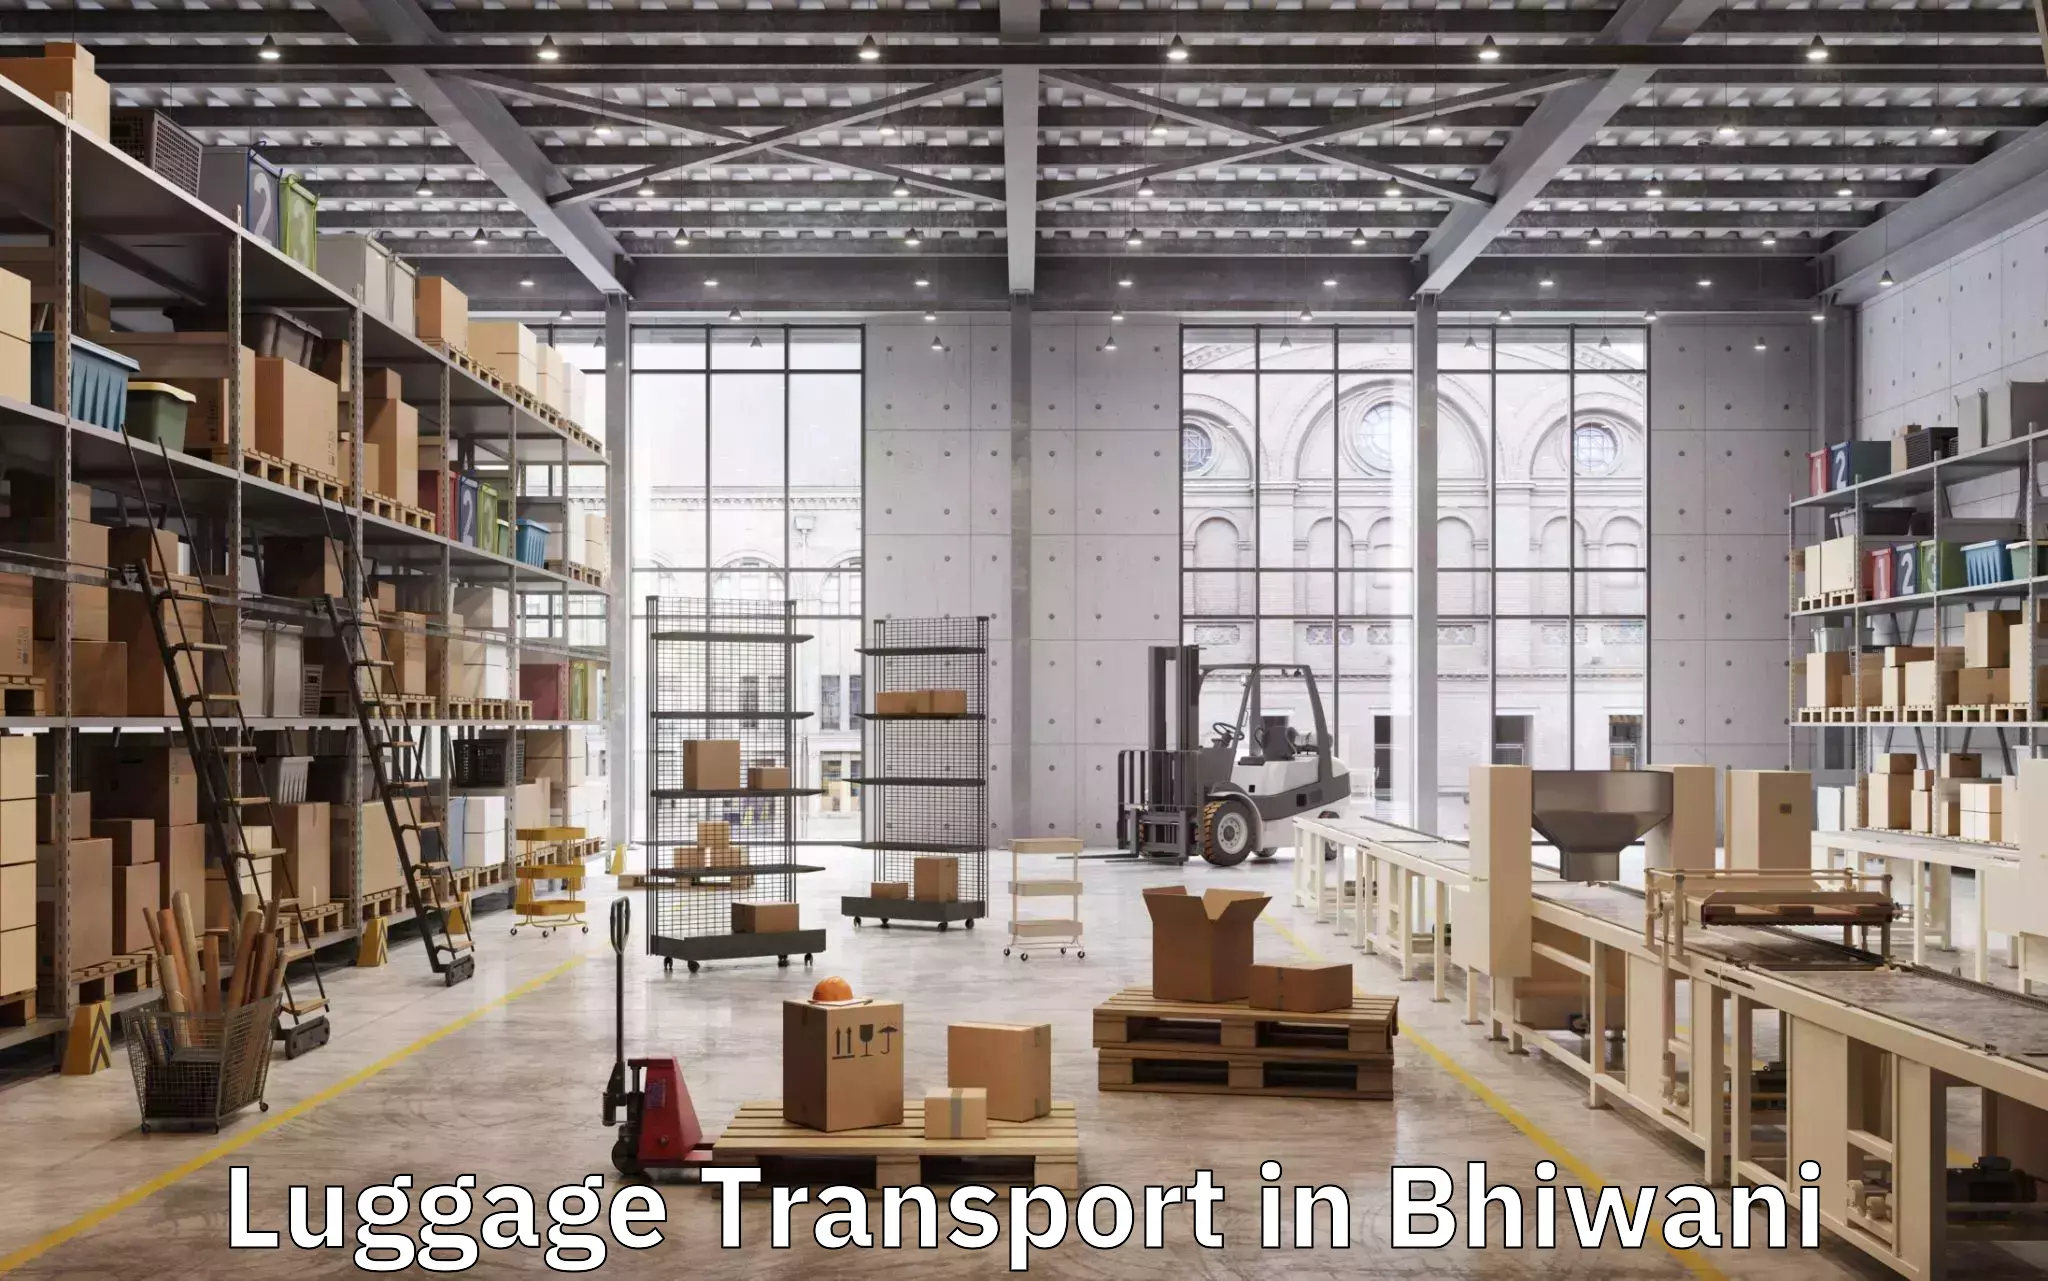 Luggage transport deals in Bhiwani